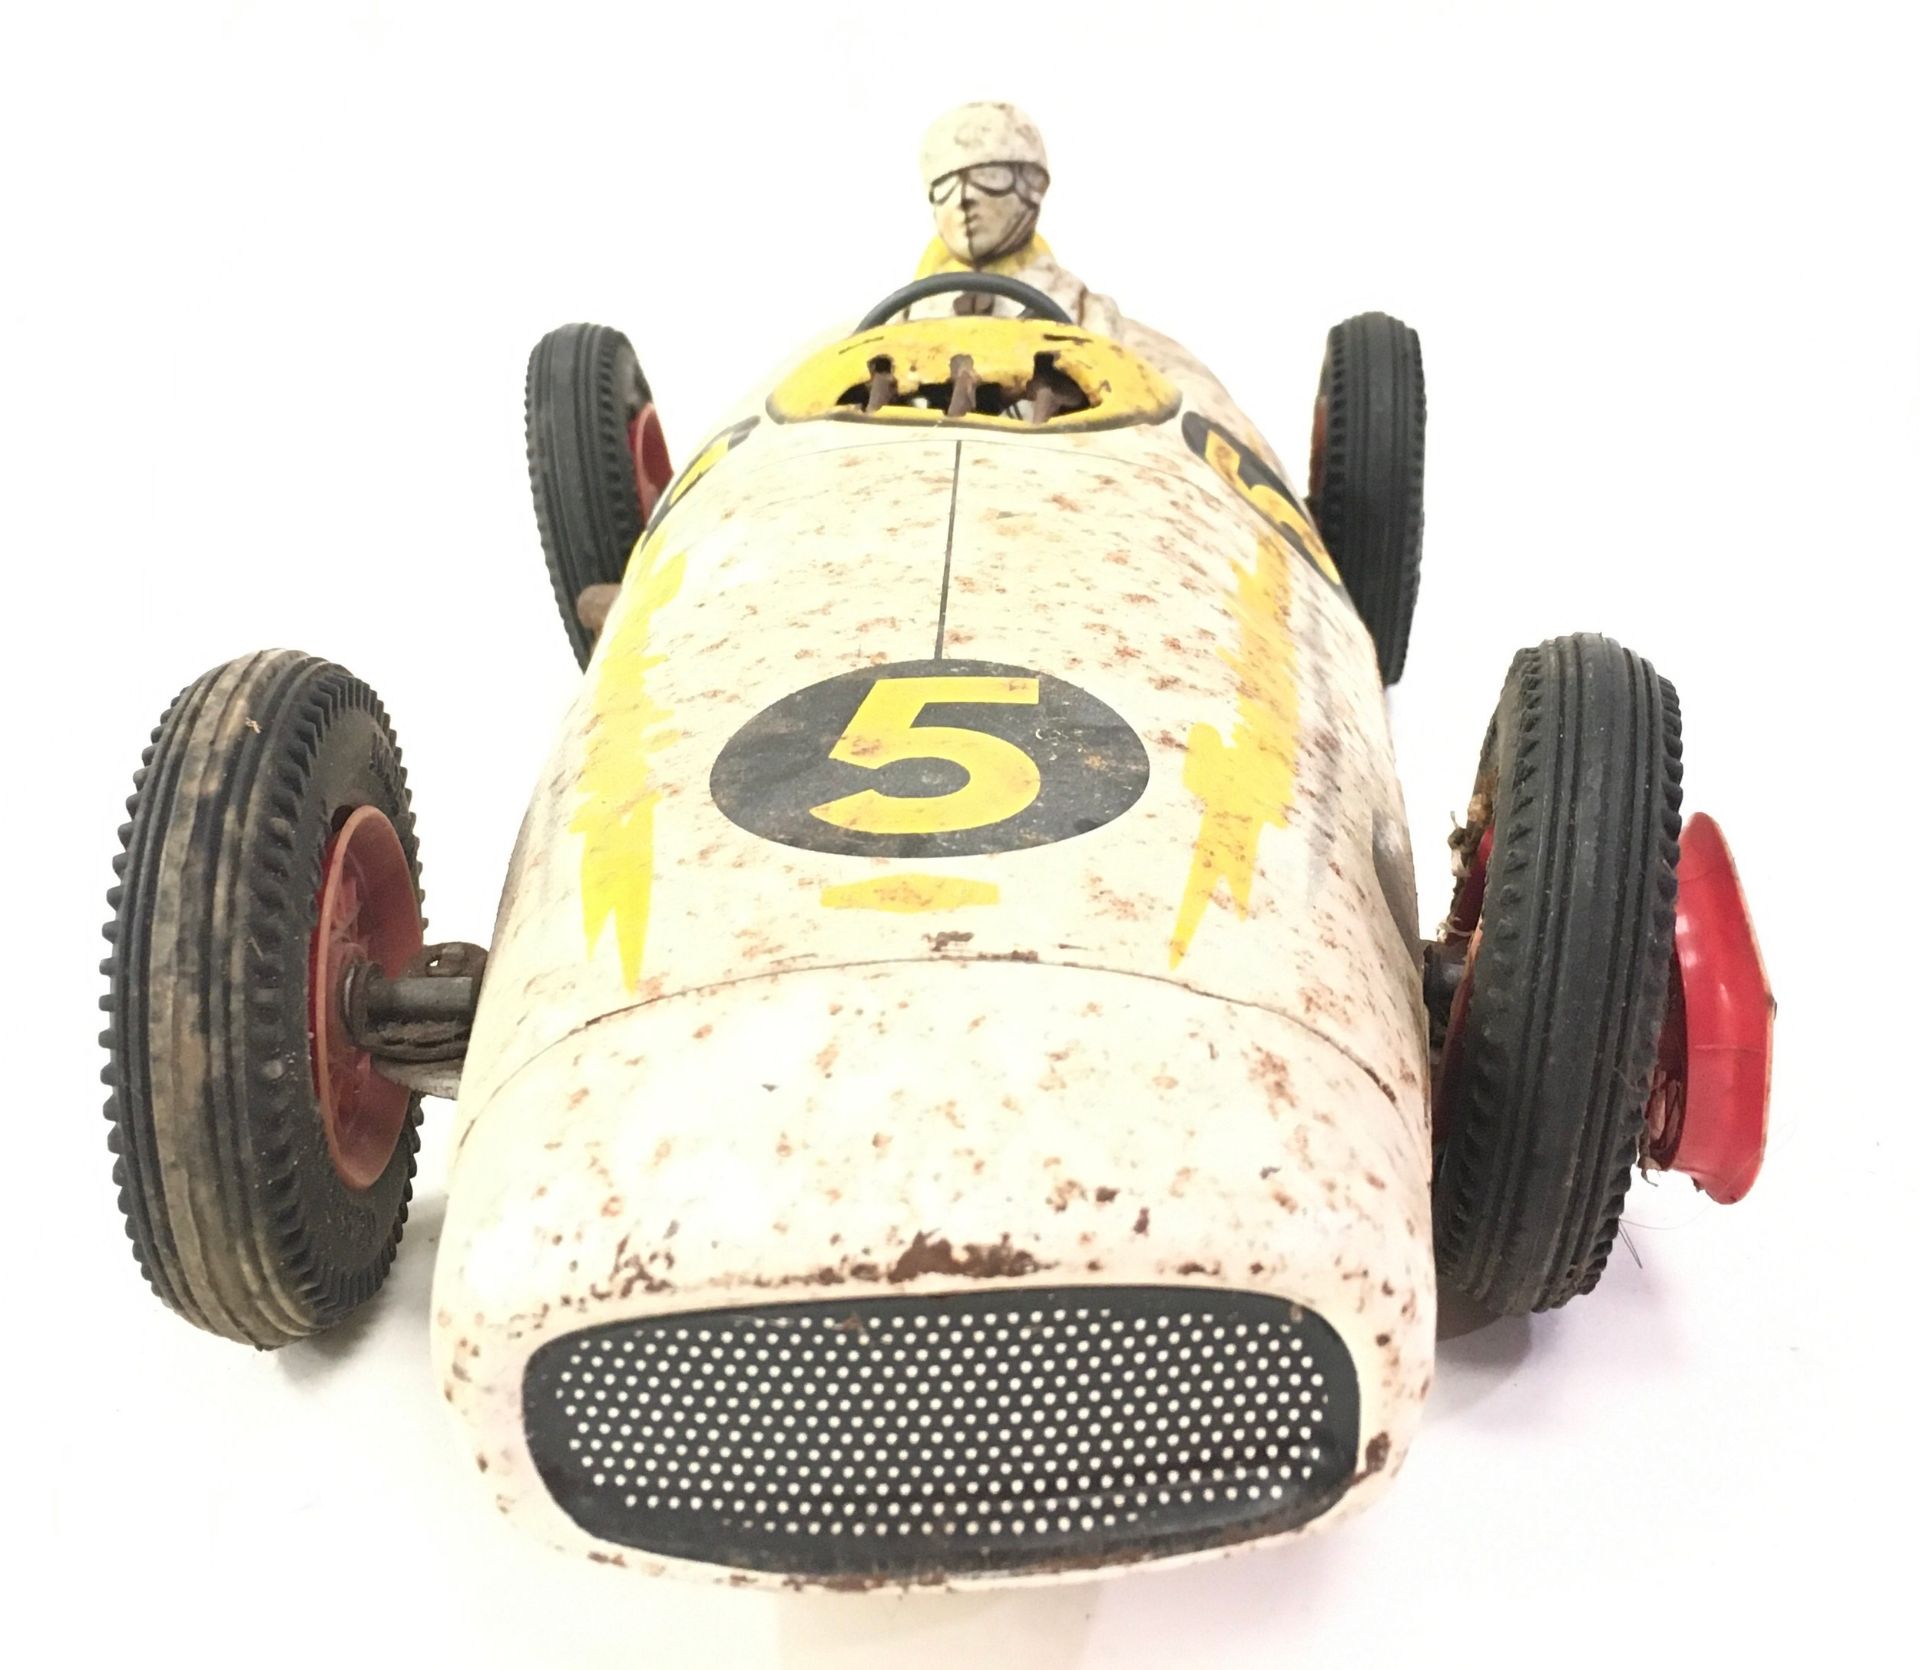 Mettoy (UK) large tinplate "Thunderbird" Mercedes Racing Car - friction drive model with driver - Image 2 of 5